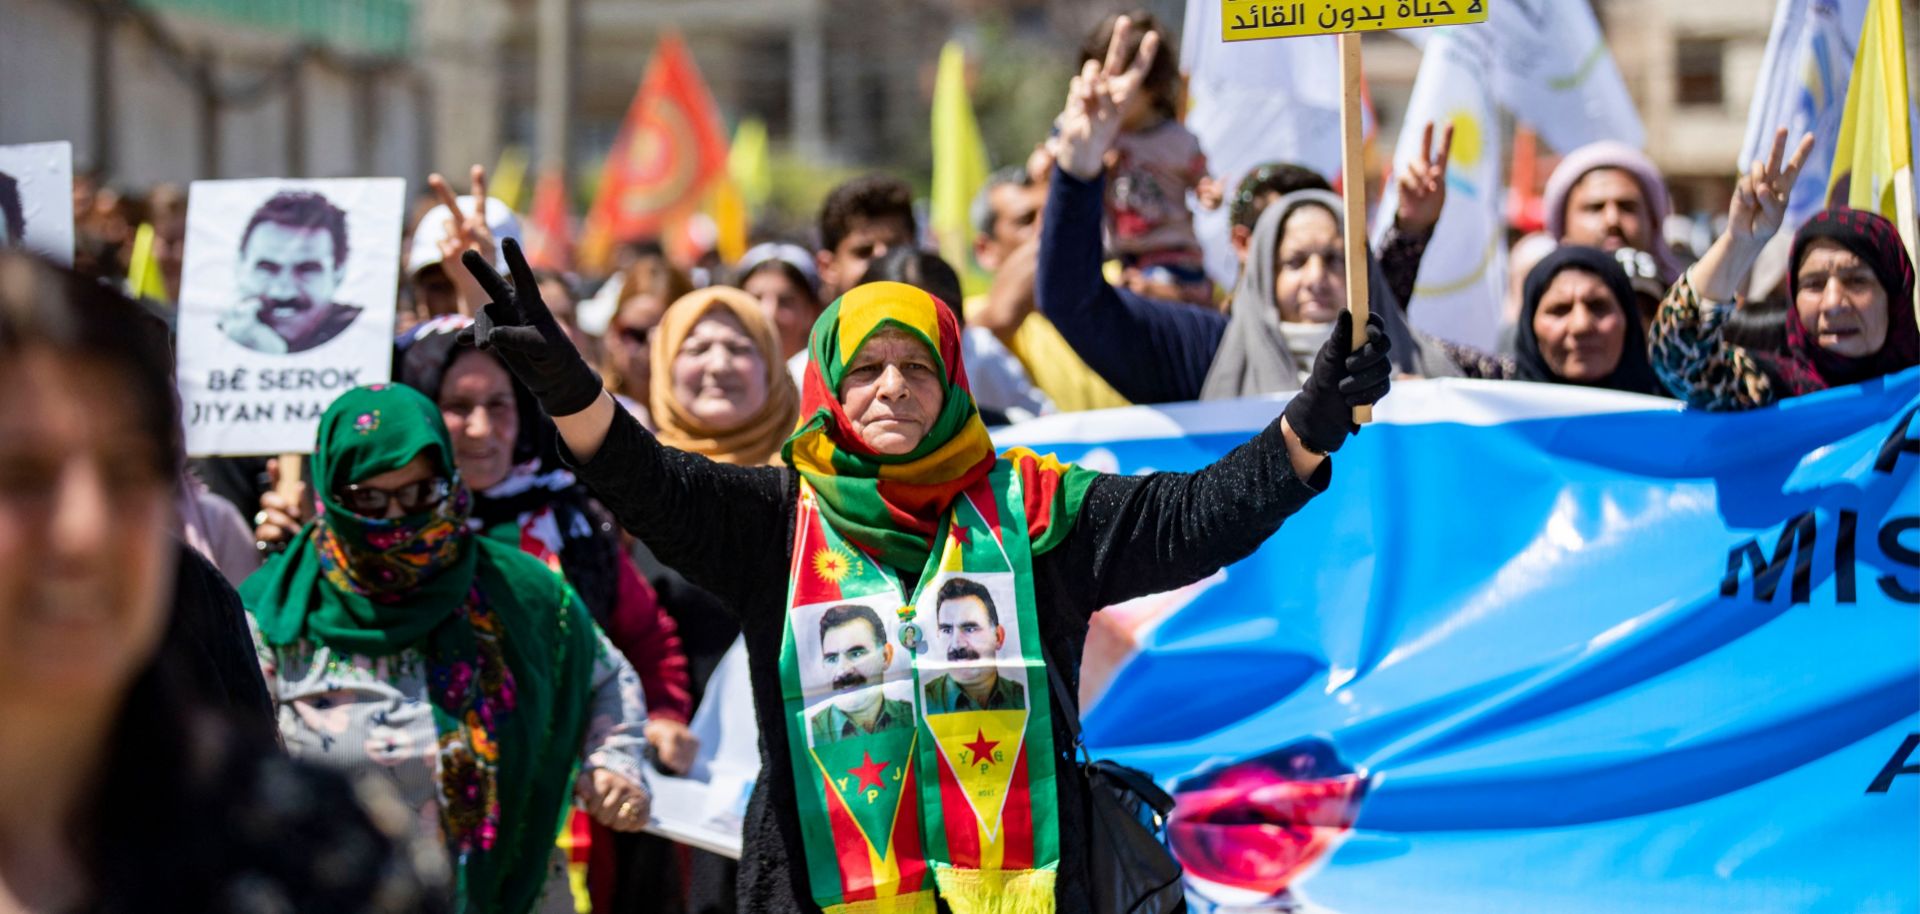 Syrian Kurds gather in the northeastern city of Qamishli on May 10, 2023, to show their support for the Turkish opposition ahead of Turkey's election. Images of Abdullah Ocalan, the leader of the Kurdistan Worker's Party (PKK), are seen on some demonstrators' placards and clothing.